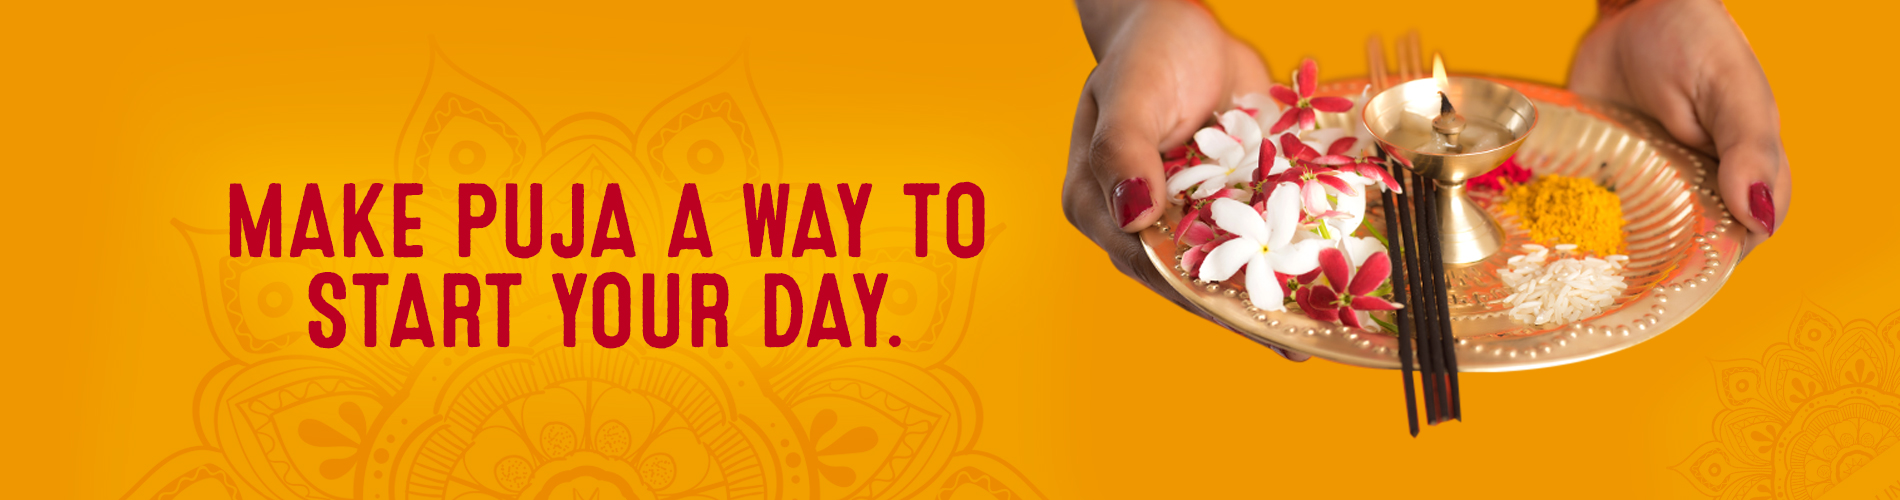 Make puja a way to start your day